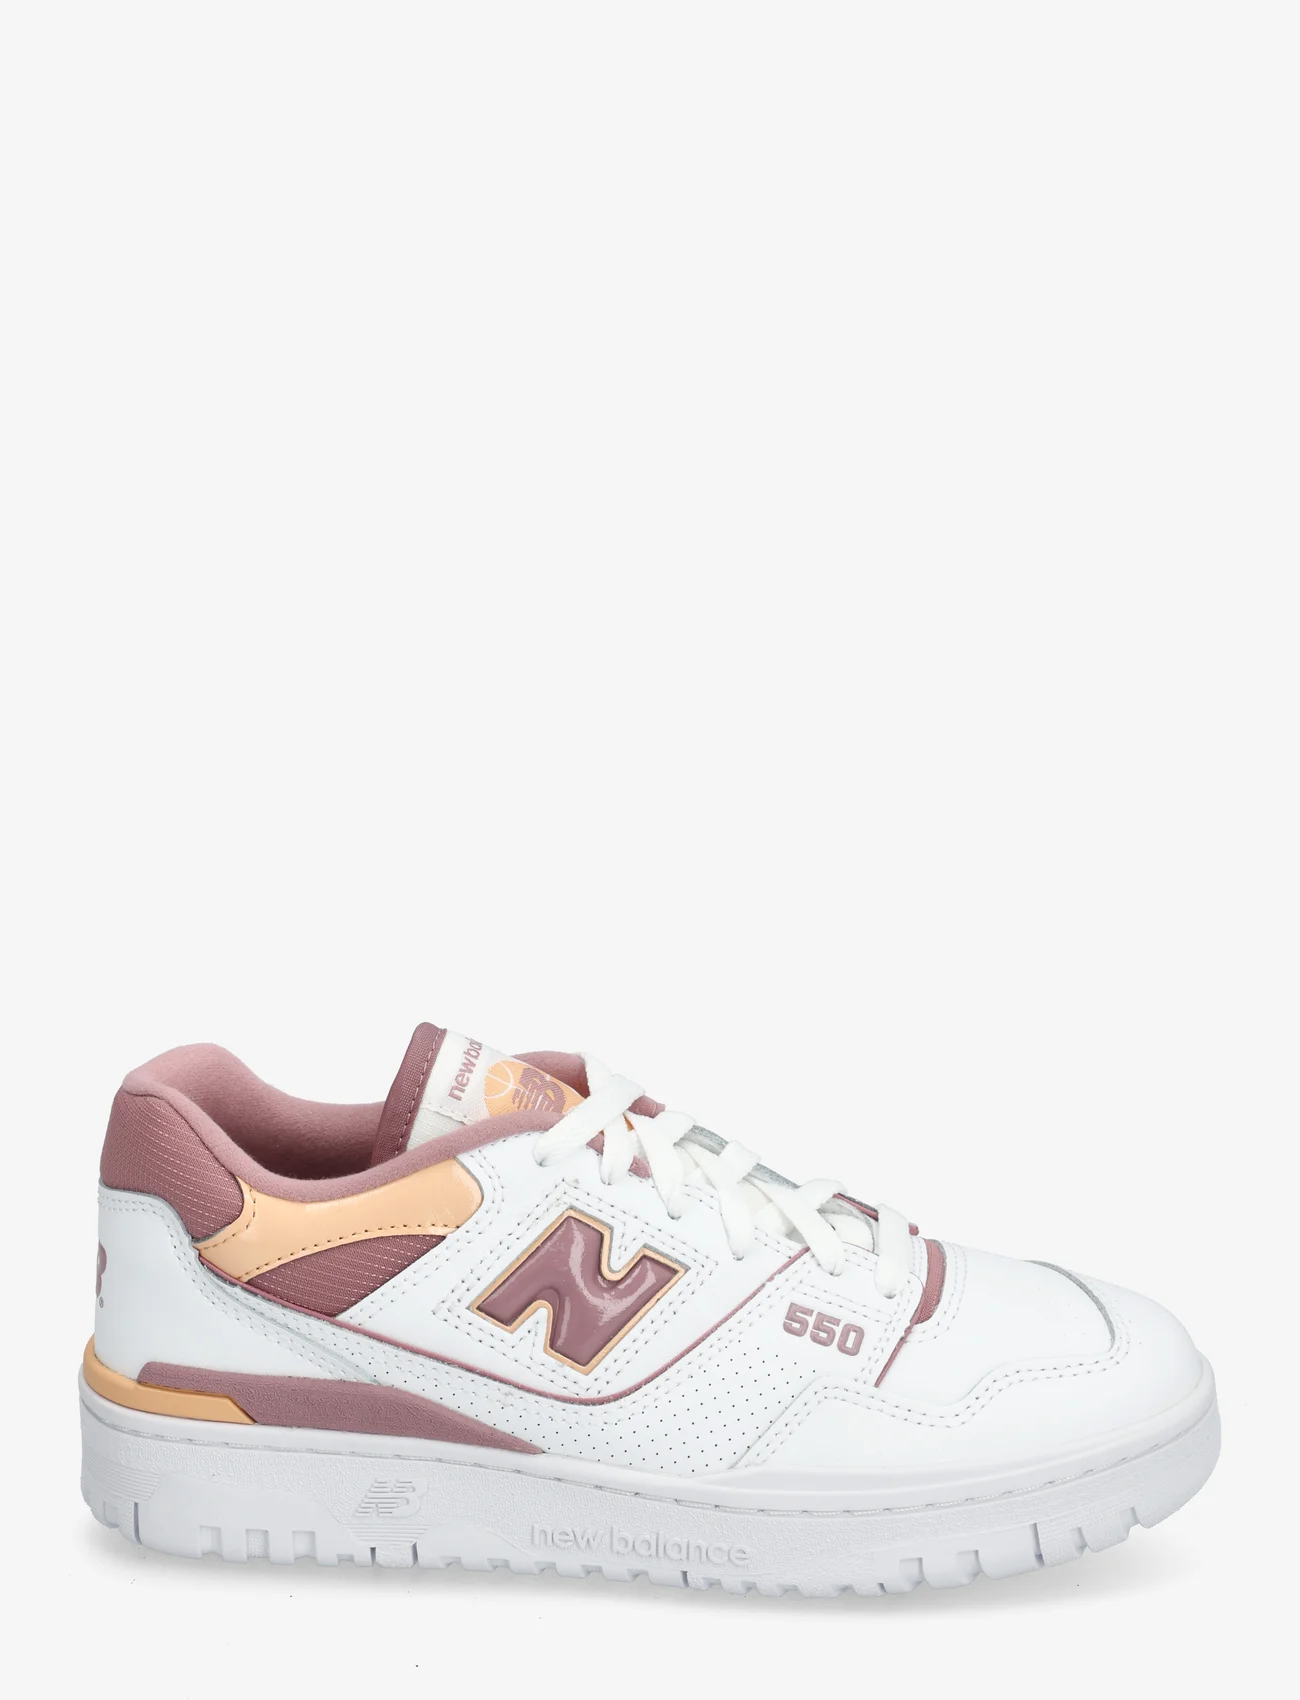 New Balance - New Balance BBW550 - low top sneakers - white - 1